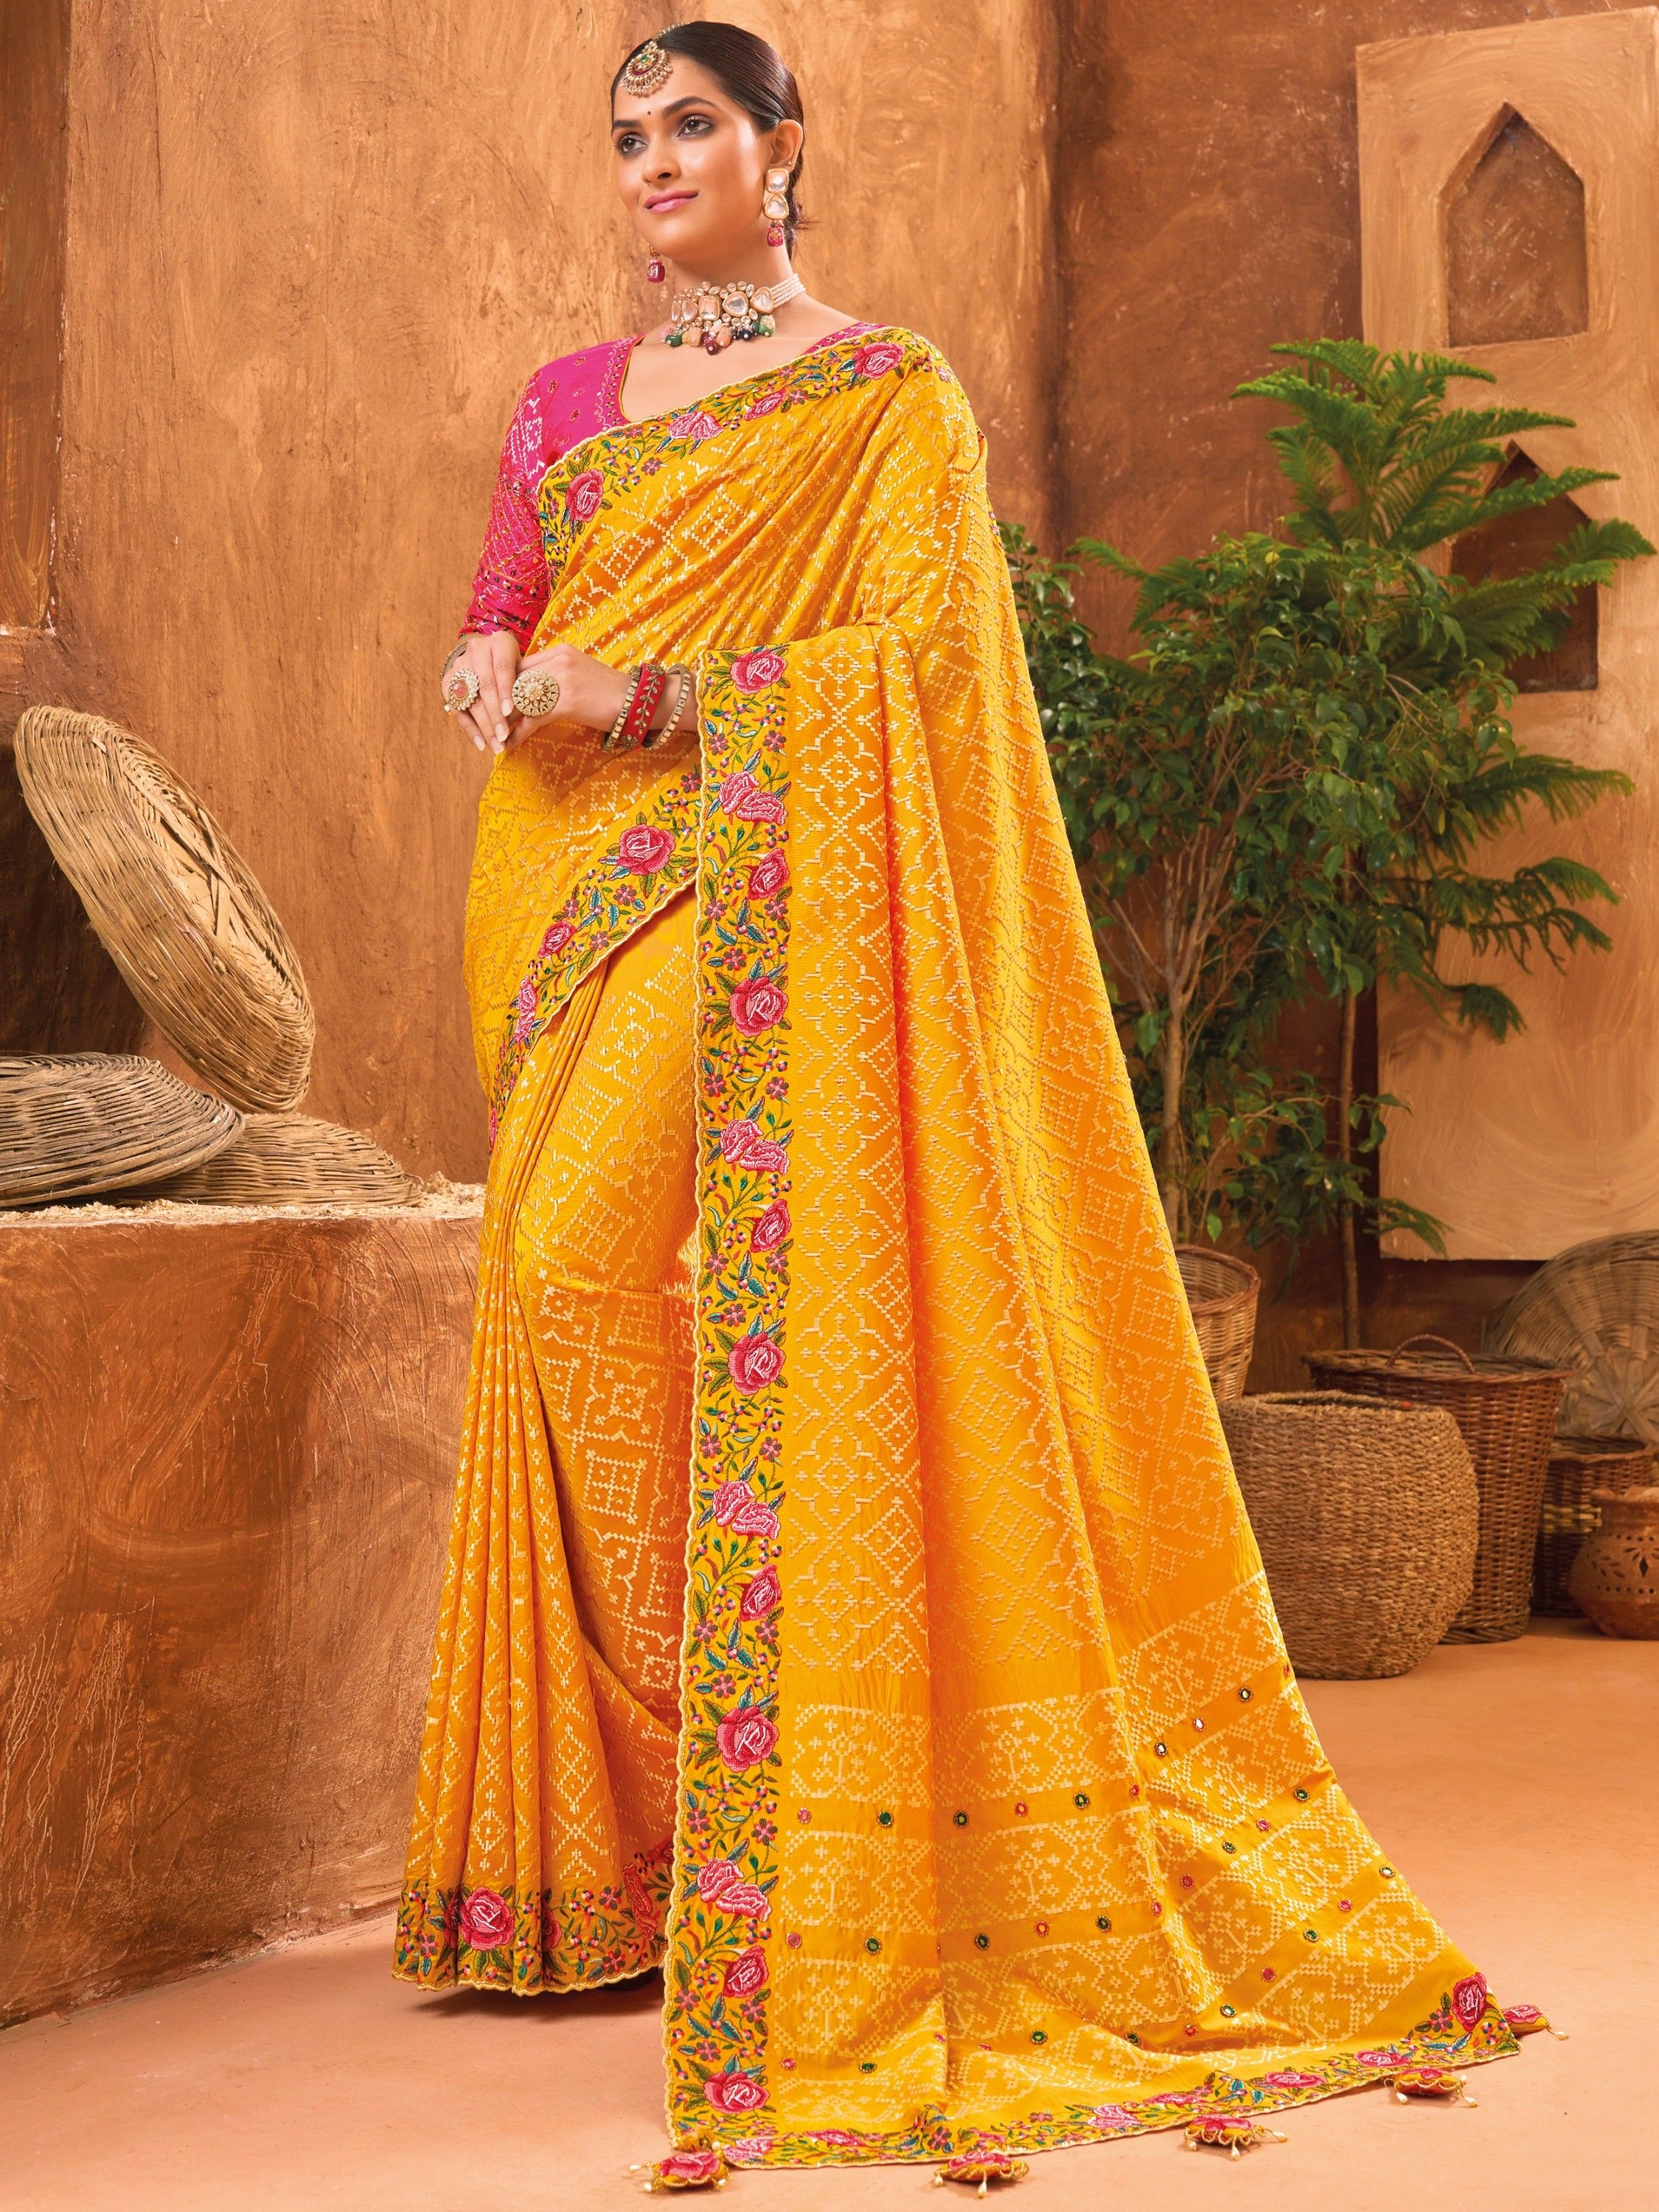 Fancy Yellow Saree Mall Brand Saree at Rs.439/Piece in surat offer by Saree  Mall